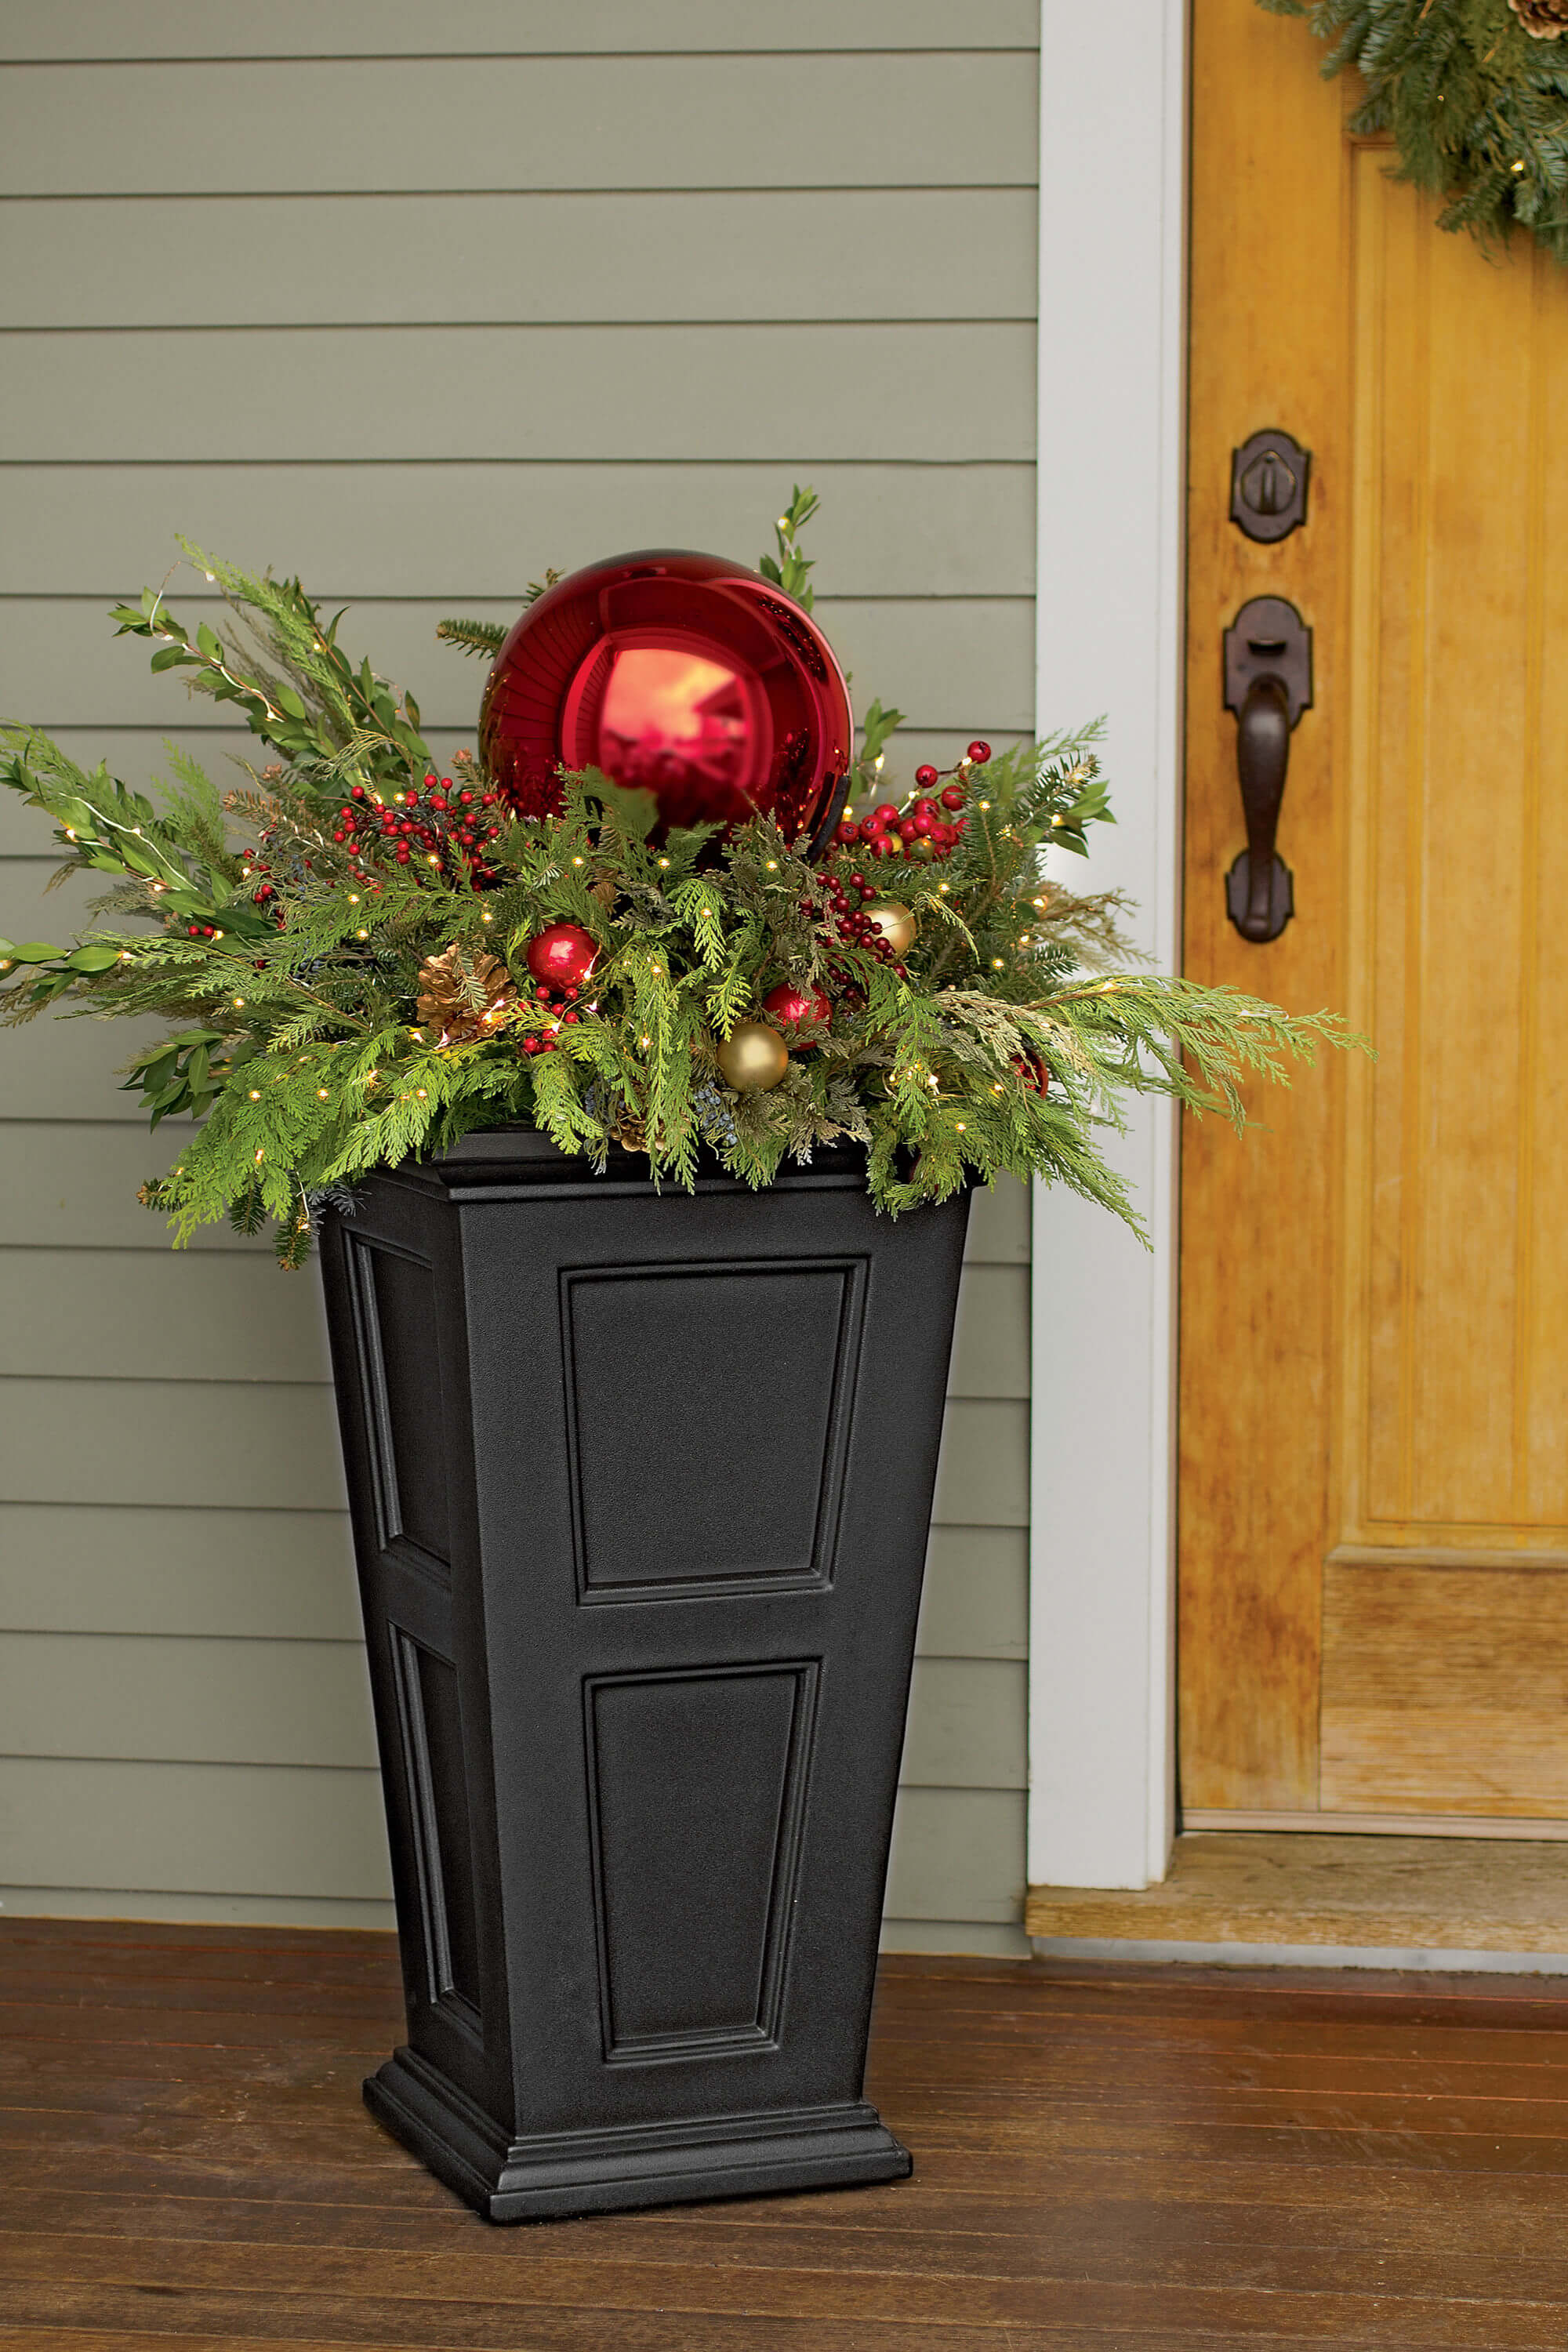 35 Best Outdoor Holiday Planter Ideas and Designs for 2021